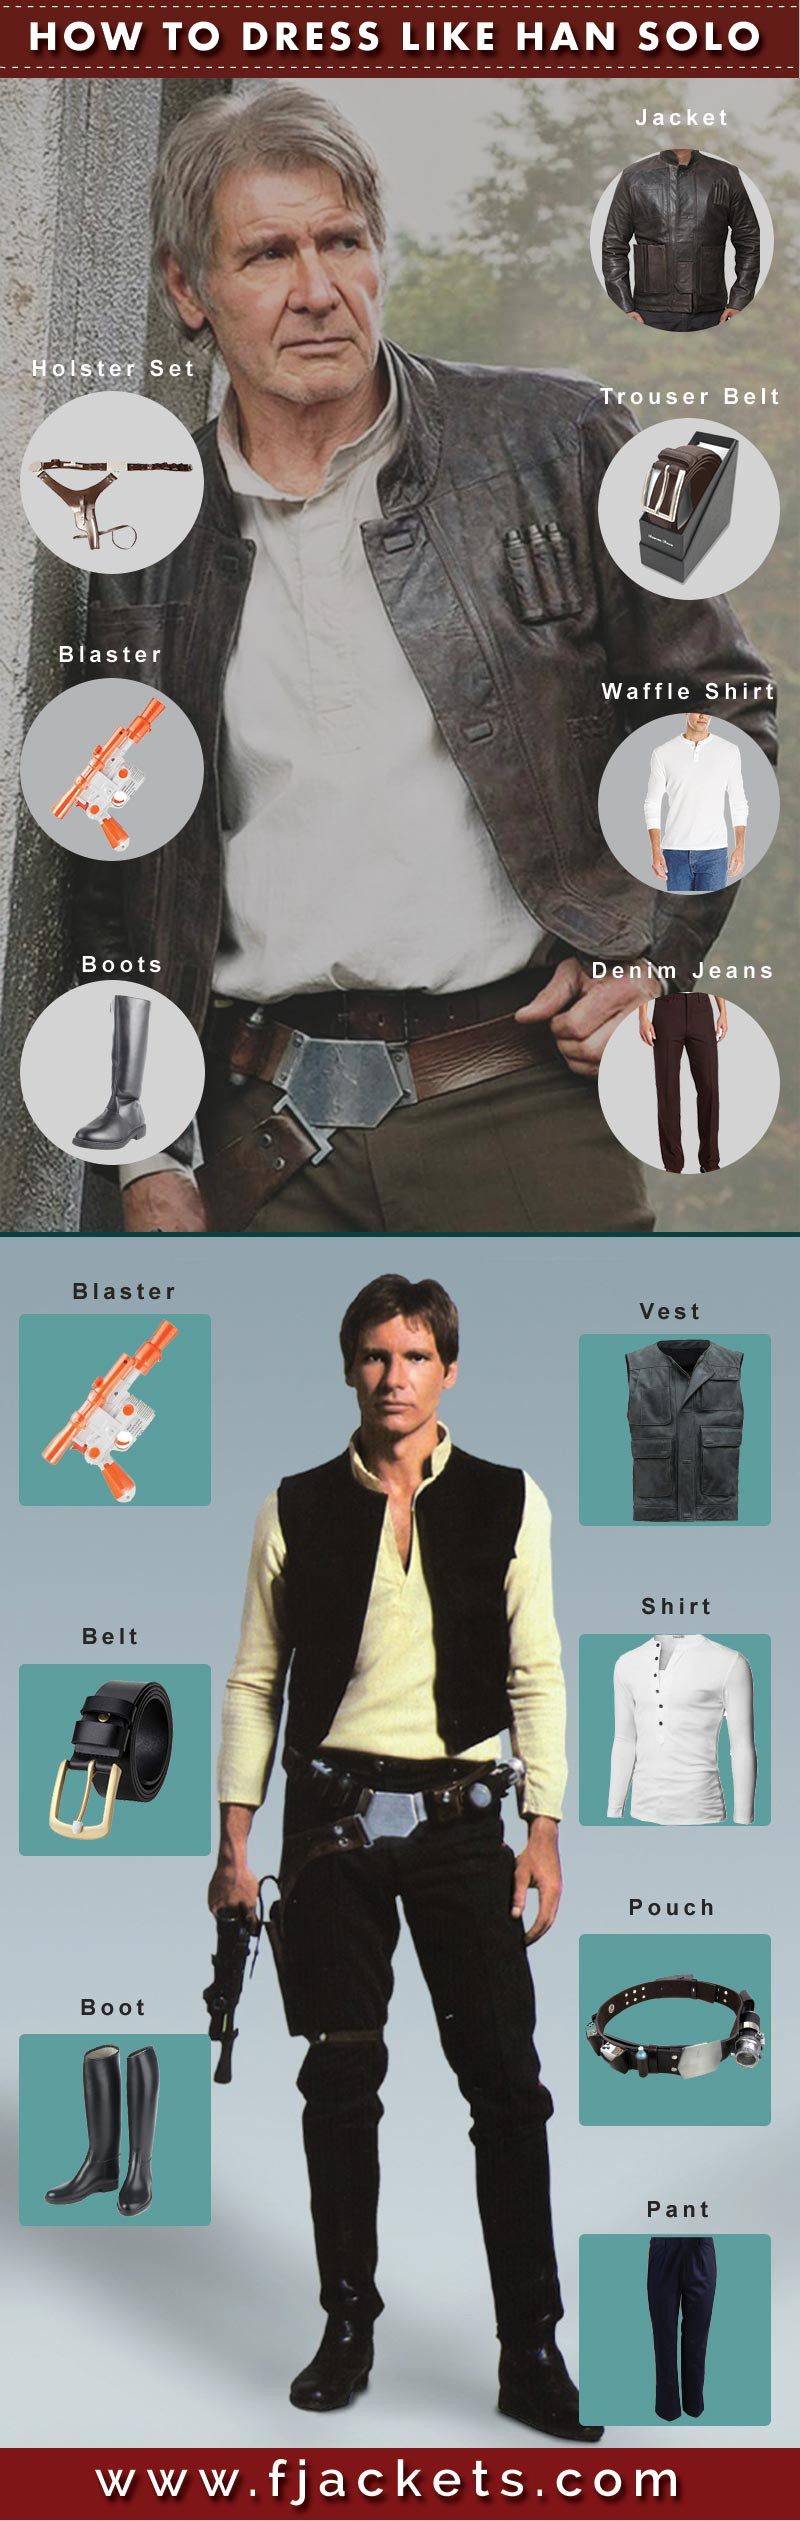 Han Solo DIY Costume
 The Best Ever DIY Han Solo Costume Guide